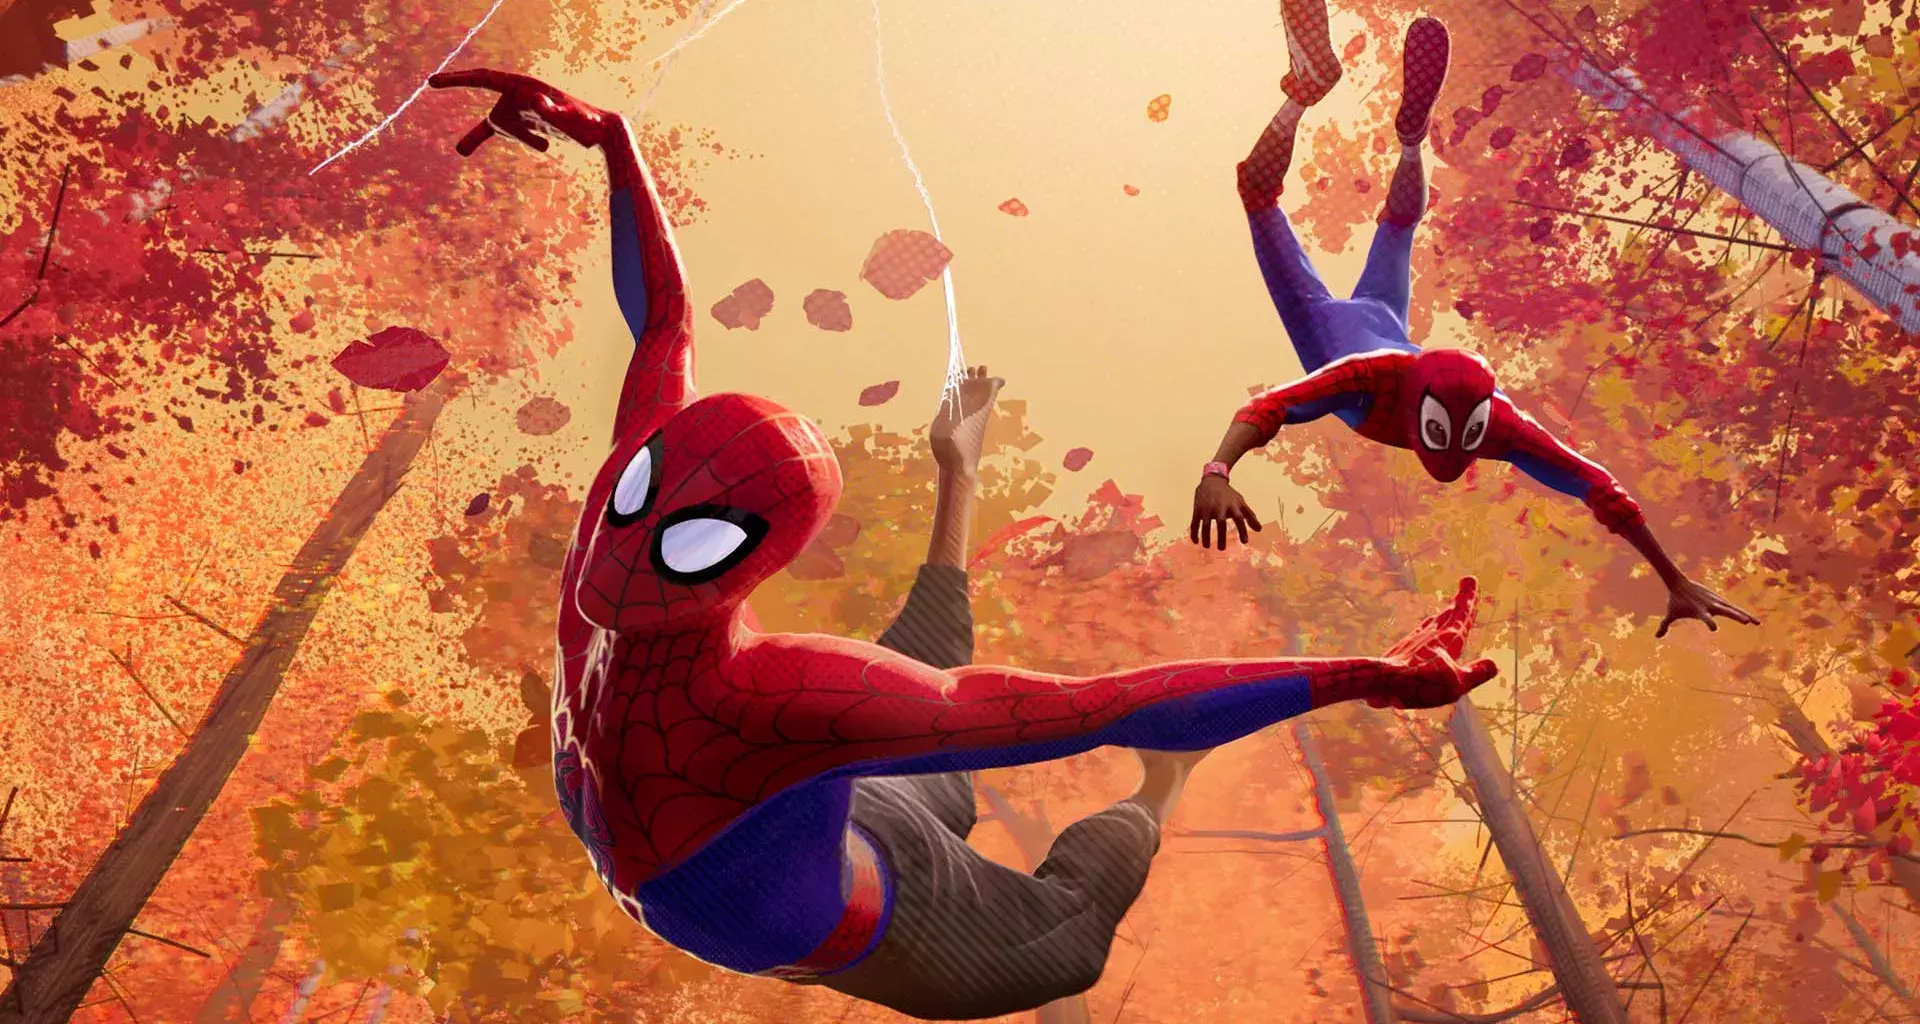 24 mexicans who worked on the Spider-Man film nominated for an Oscar